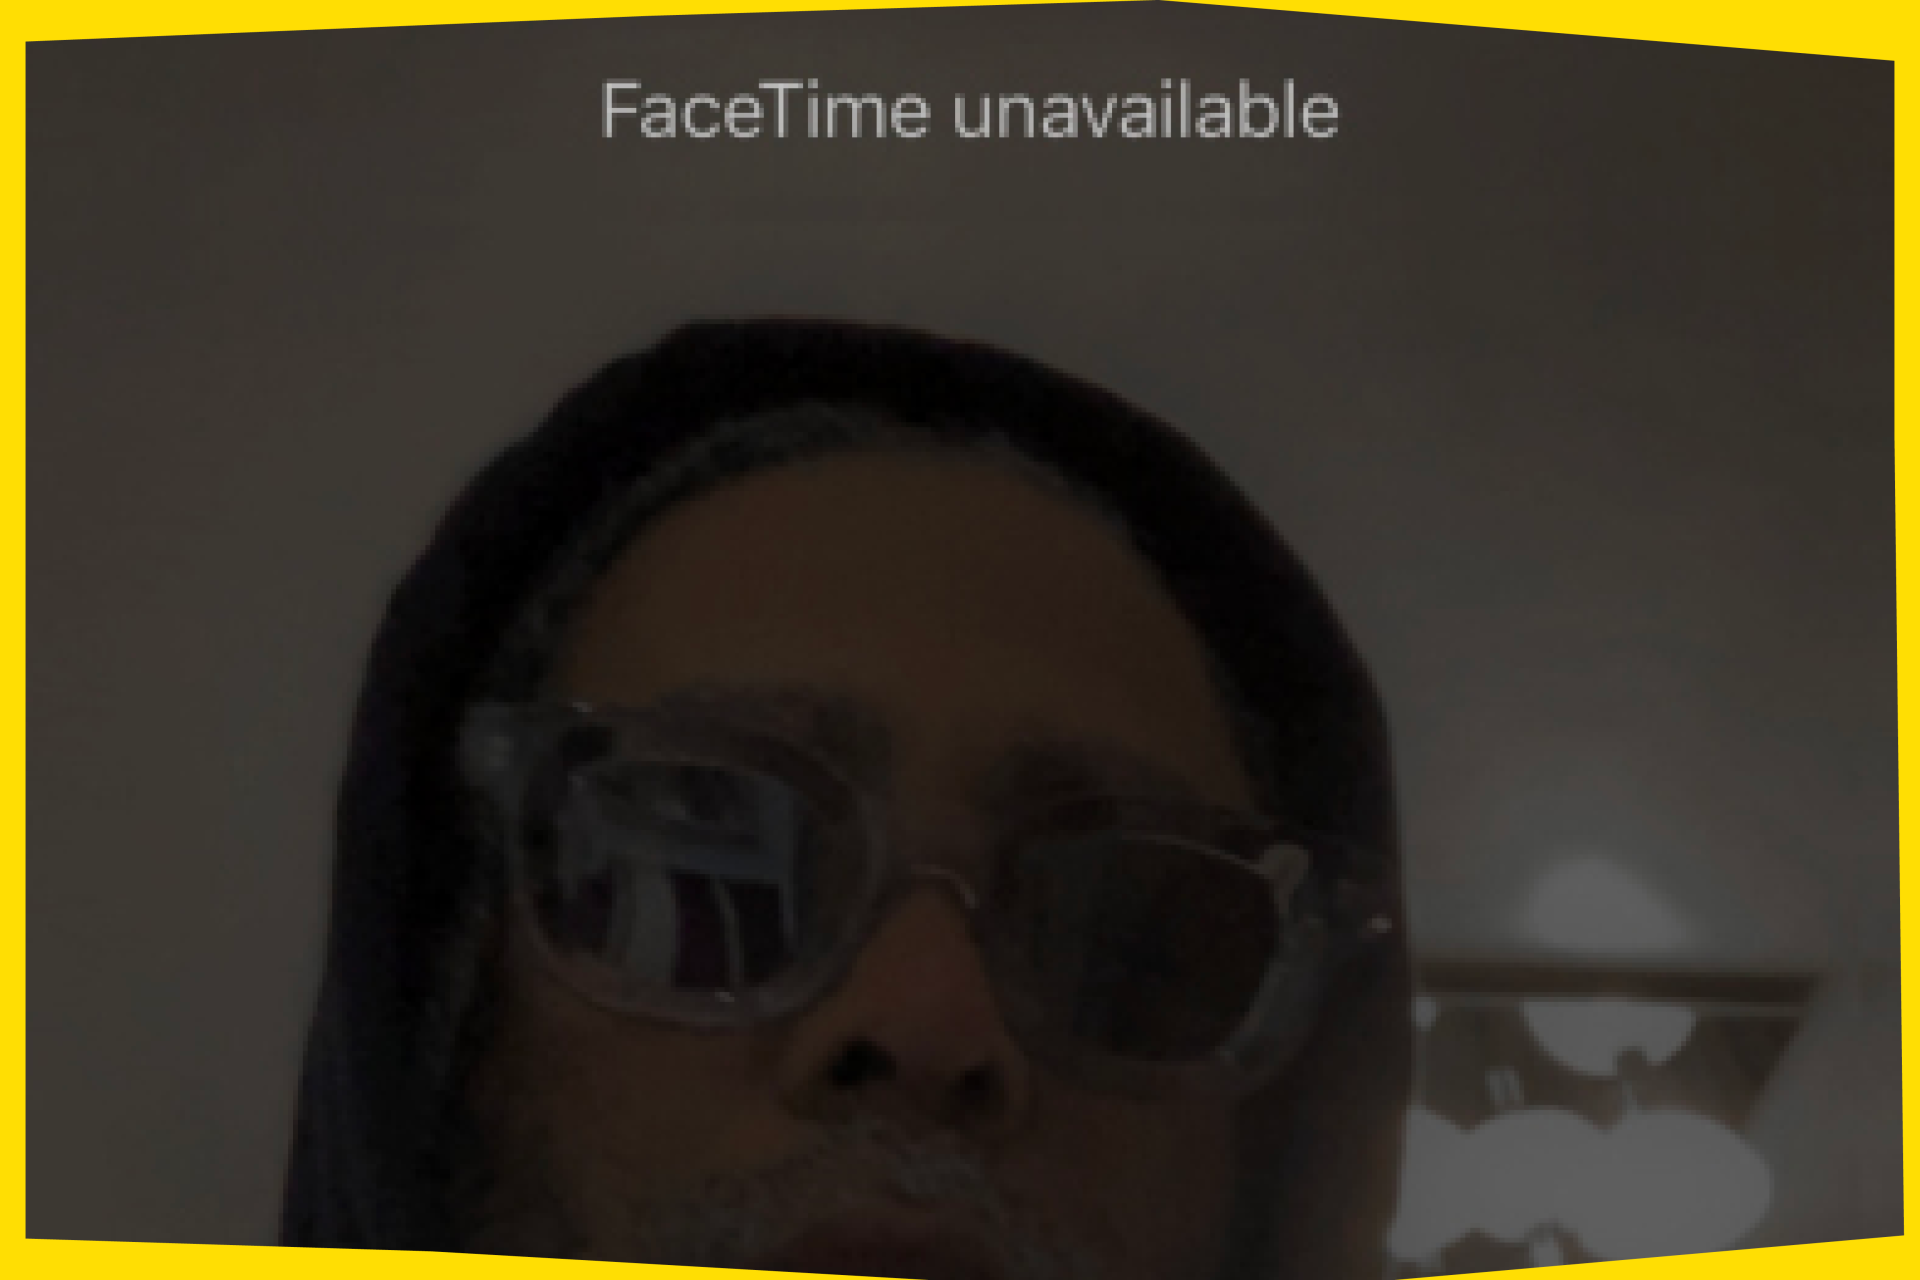 Arthur Jafa looks on in sunglasses and a black hoodie in a photo that looks like a screenshot from an iPhone. At the top it says "Facetime unavailable"